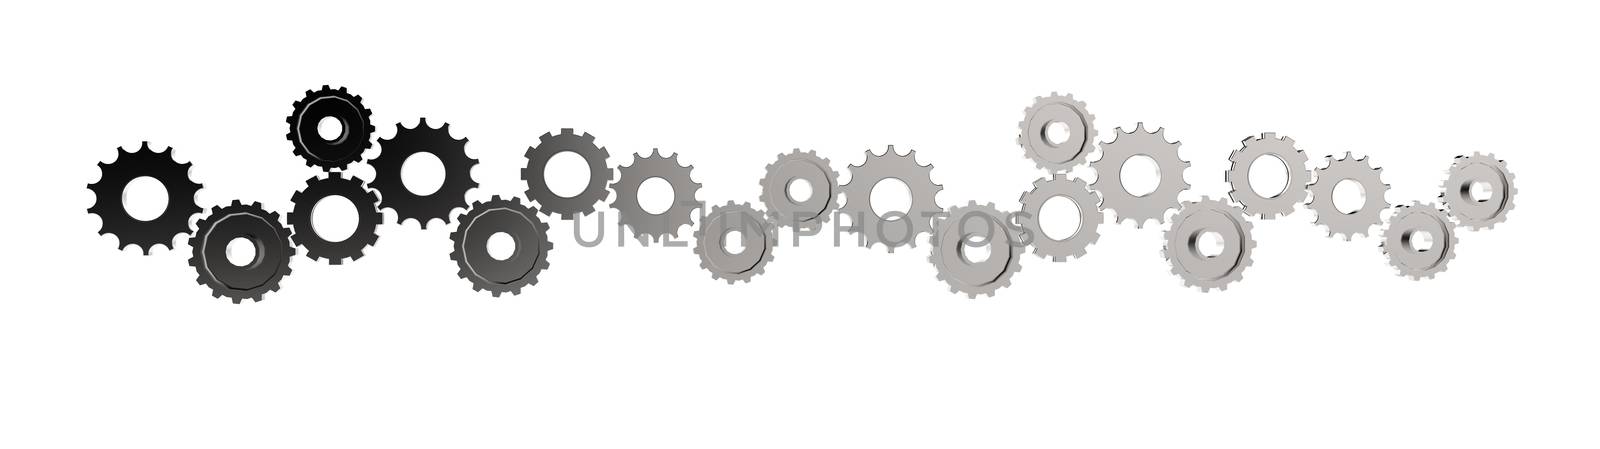 3d cog gear to success as concep by everythingpossible